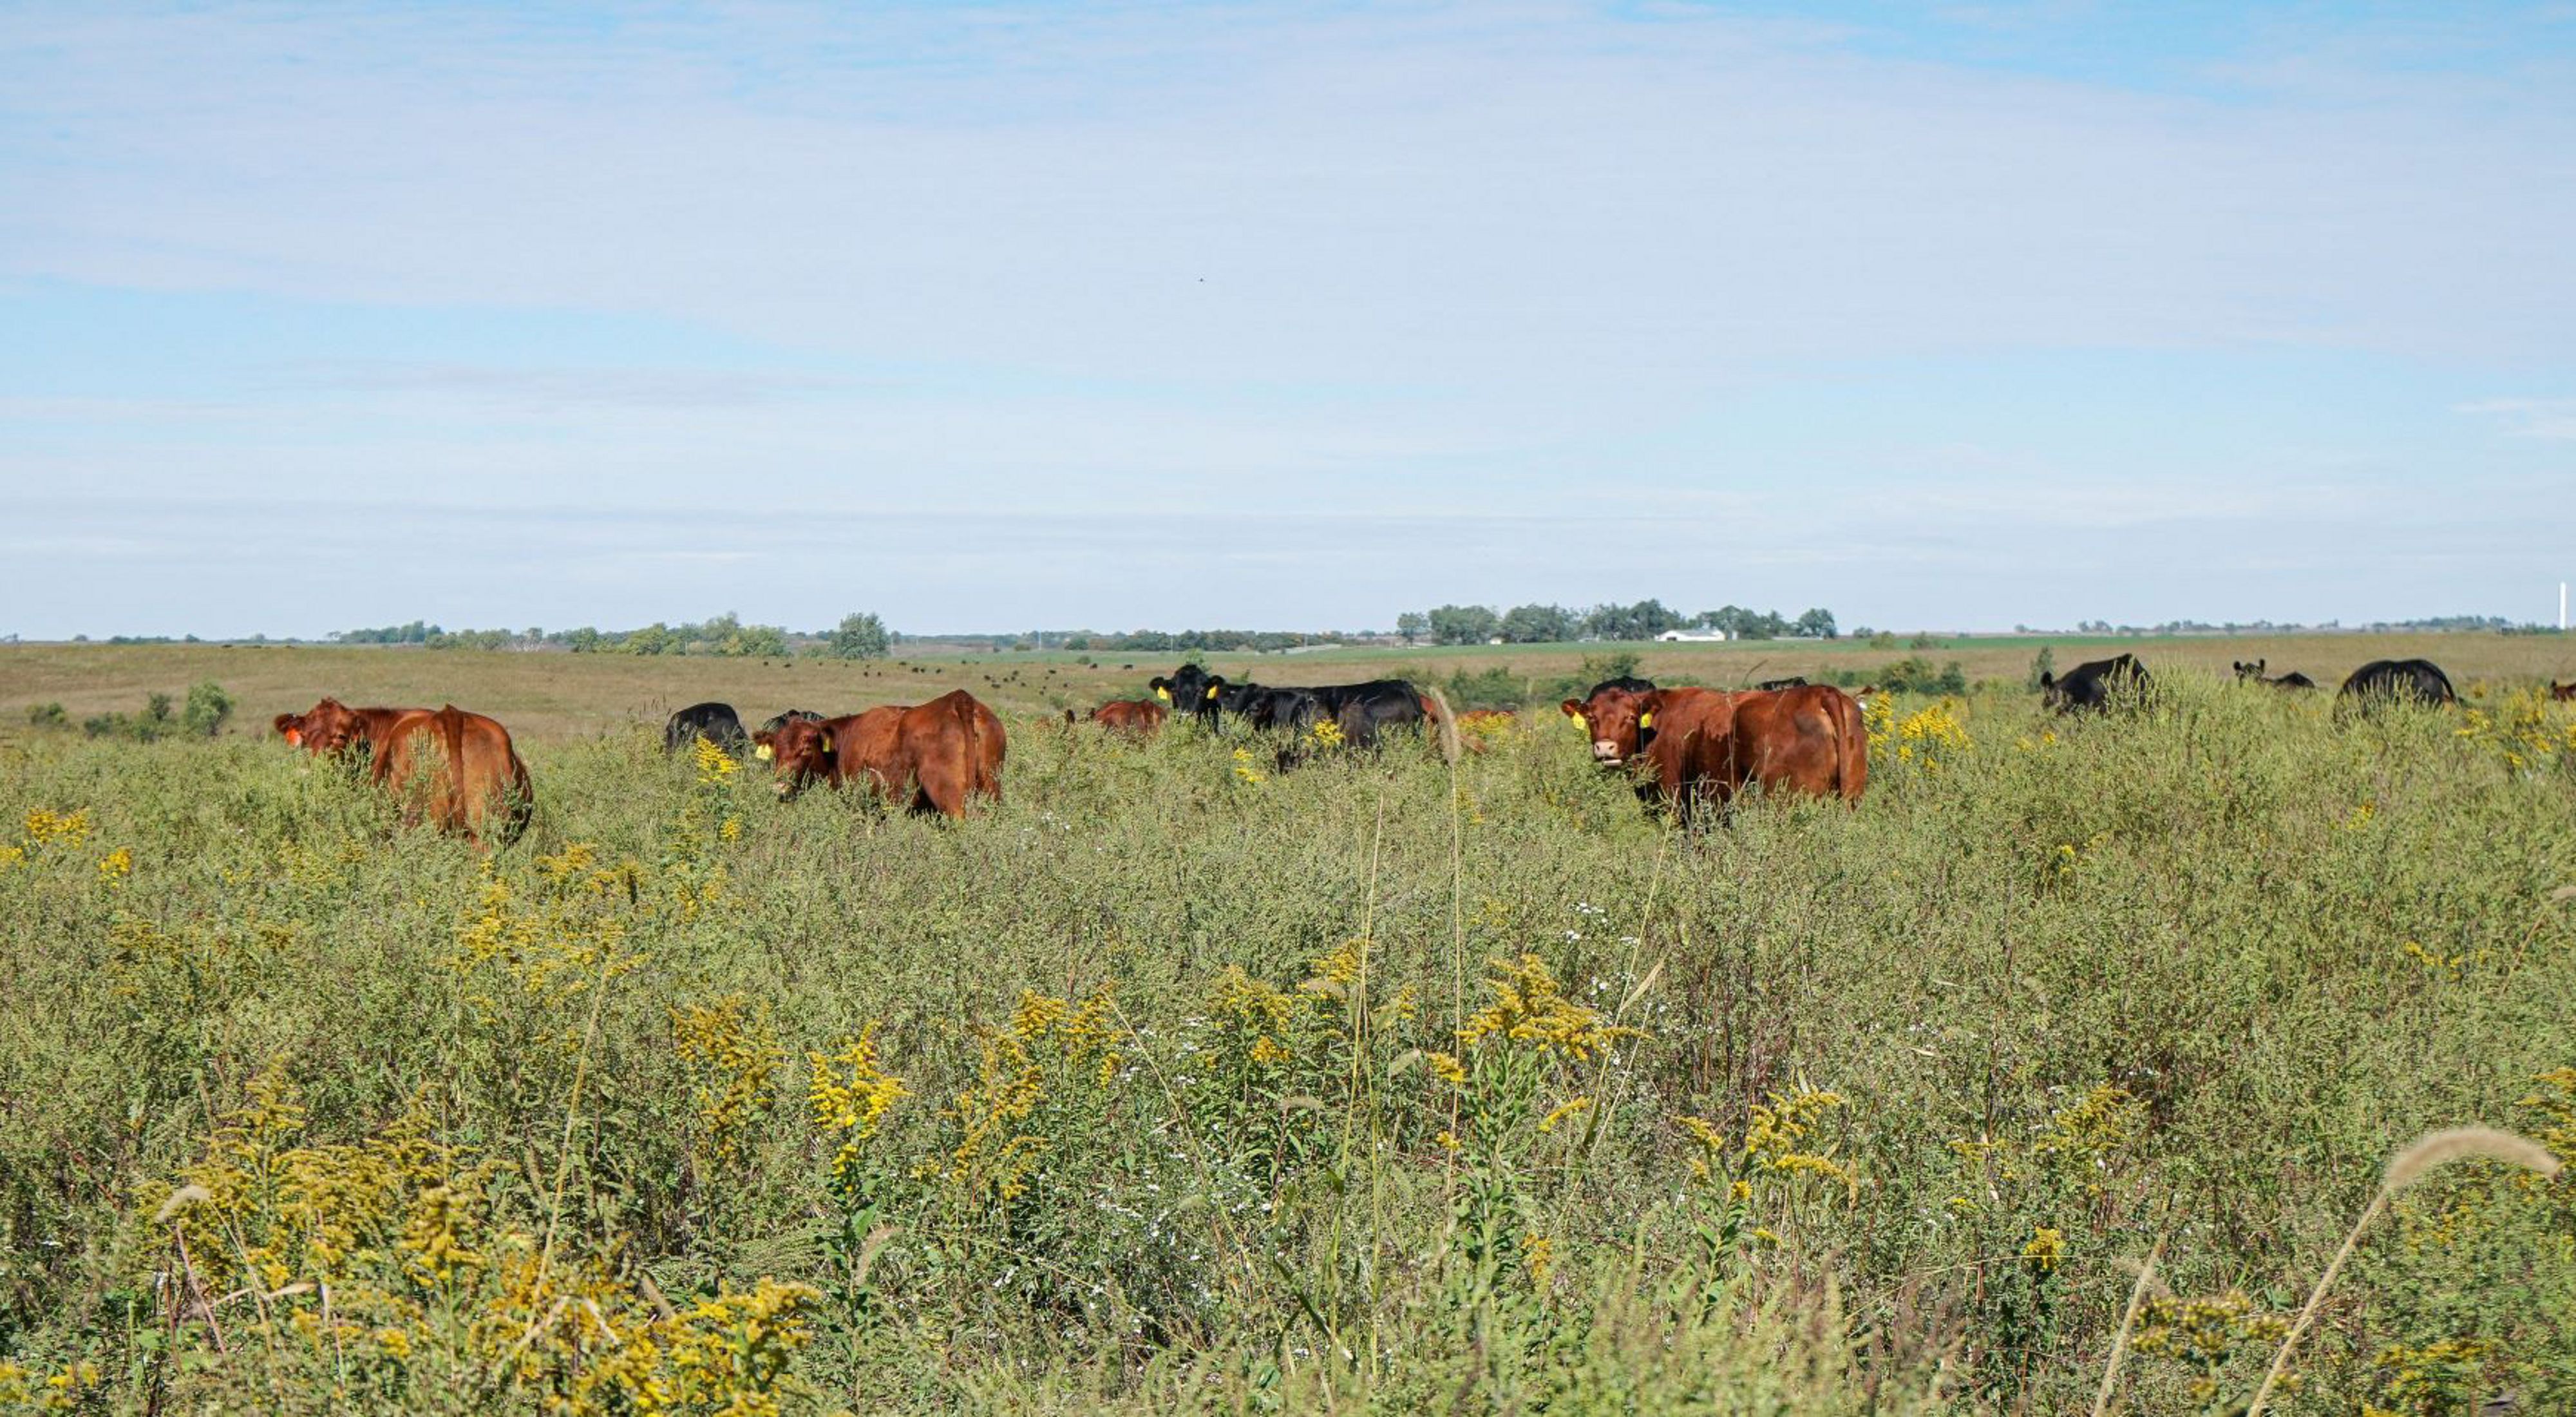 A small group of cattle in a grassy field.